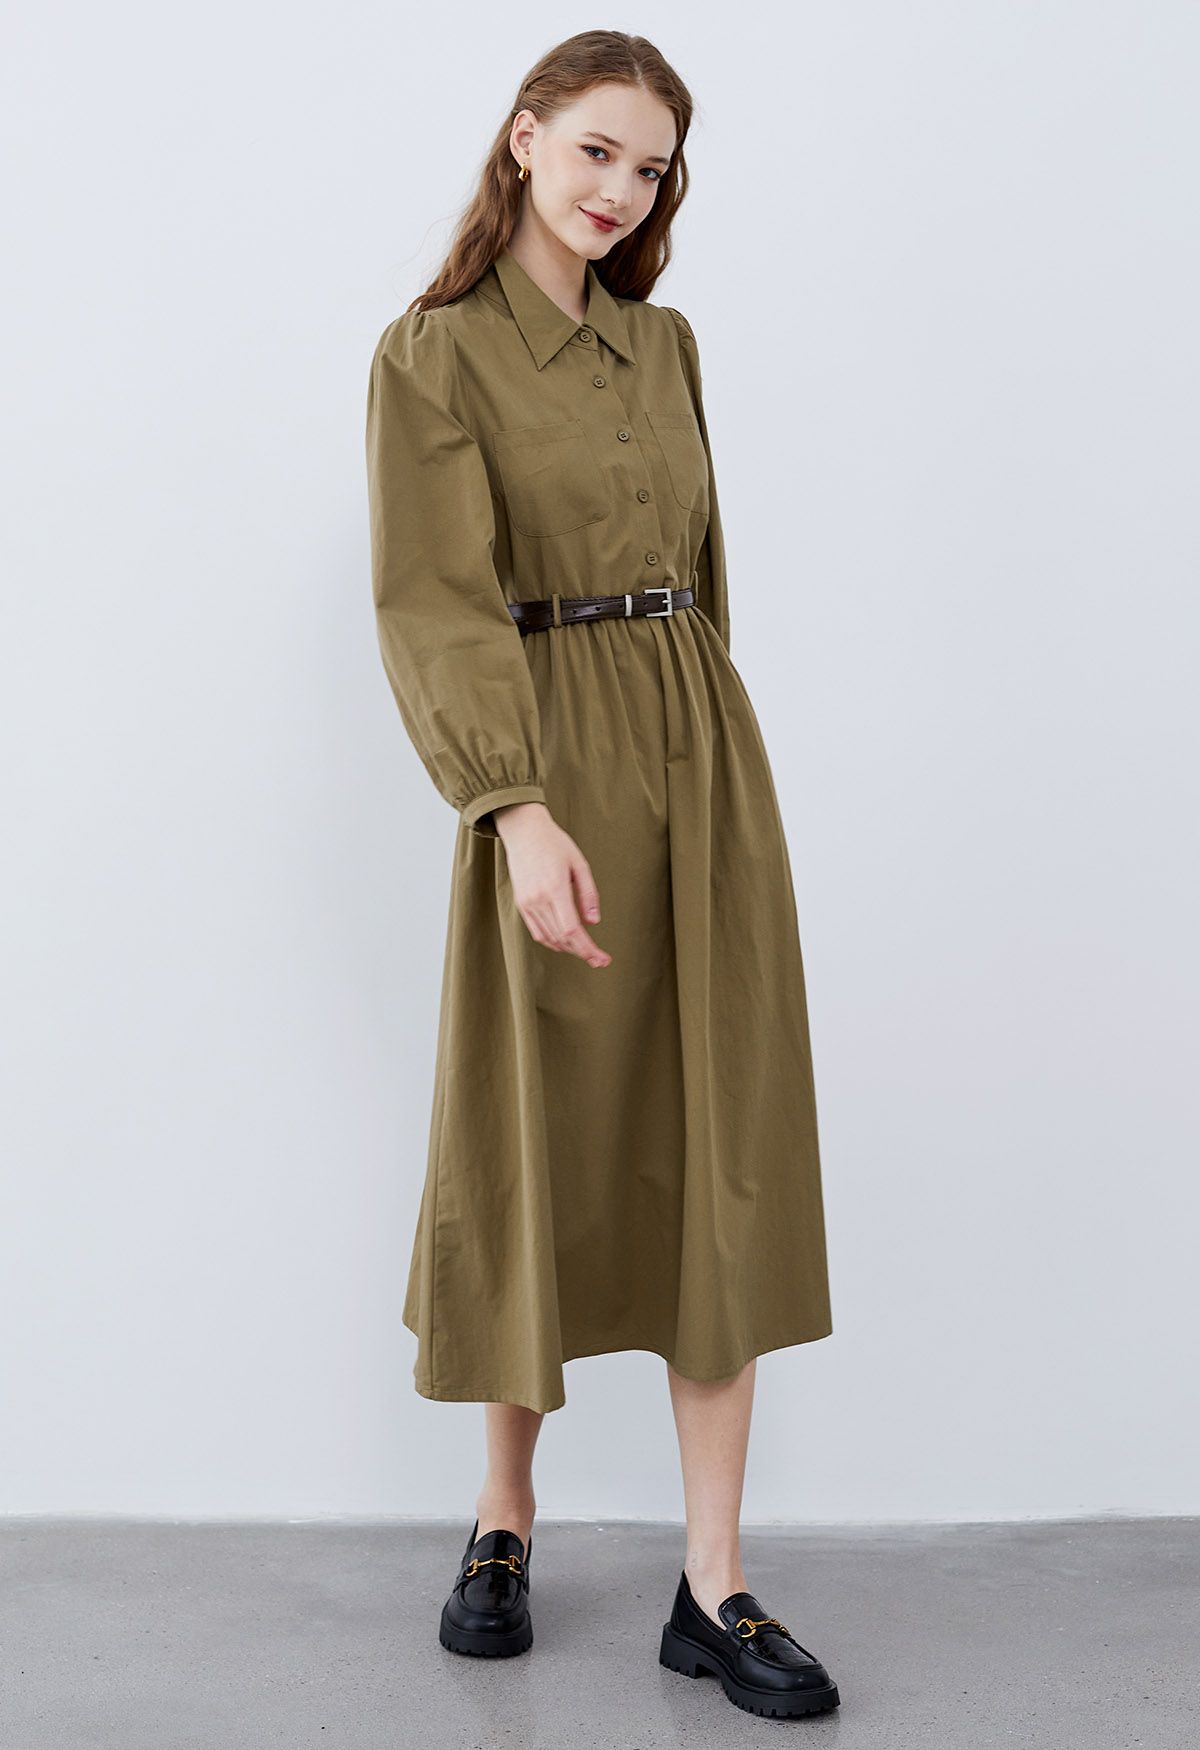 Patch Pocket Belted Cotton Shirt Dress in Khaki